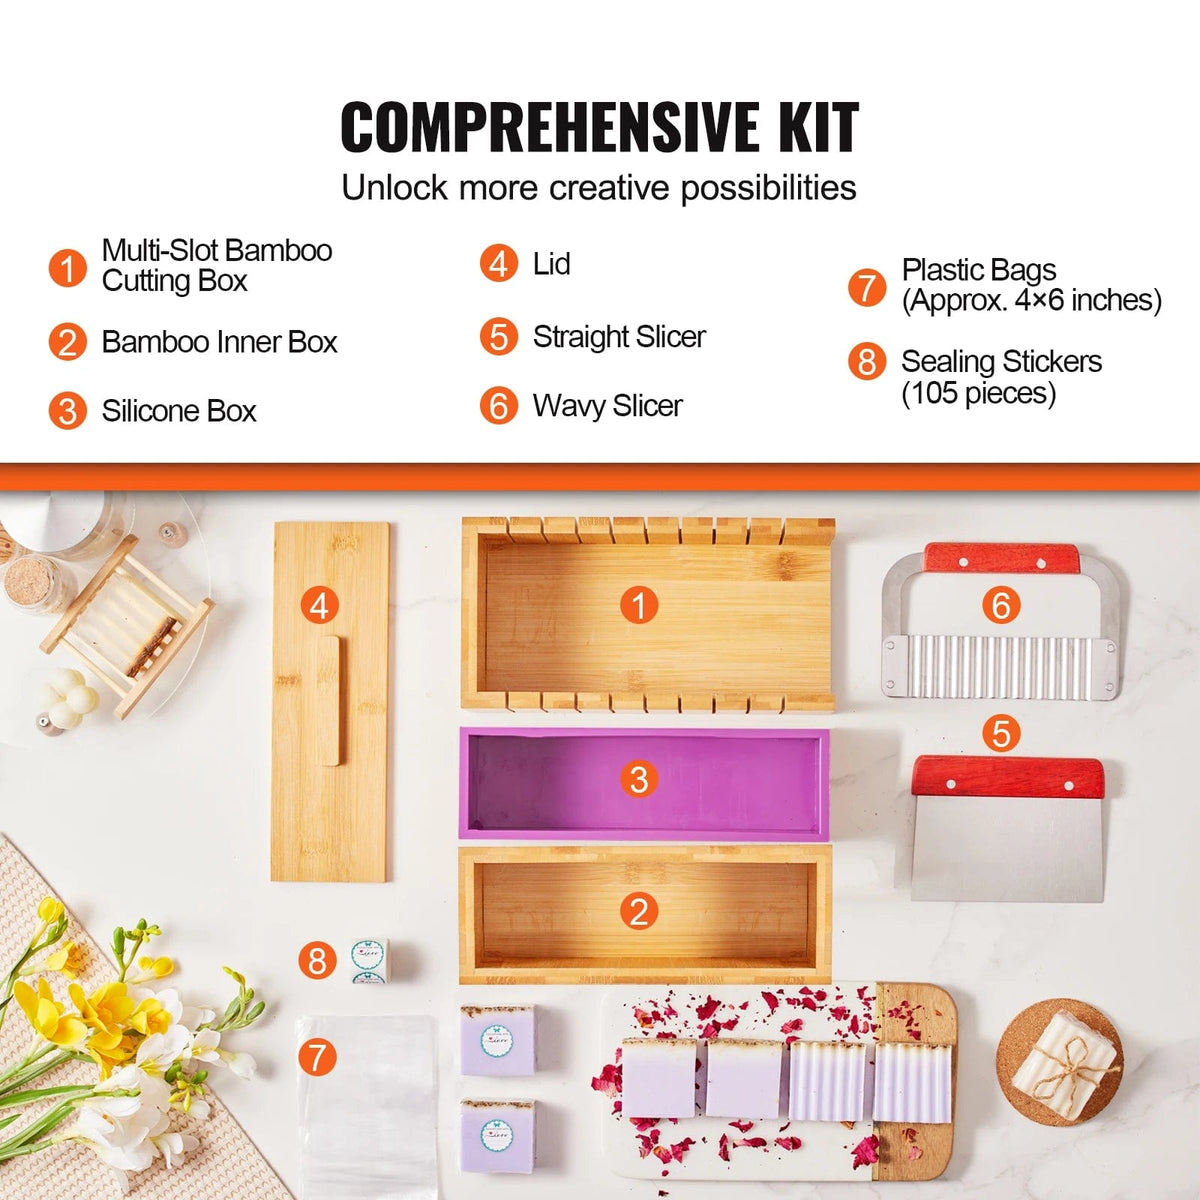 KH-Q02 Complete Soap Making Kit: Precision 1-Inch Cut with Bamboo Box, Silicone Molds, Stainless Steel Cutters - Ideal for DIY Handmade Soap Crafting